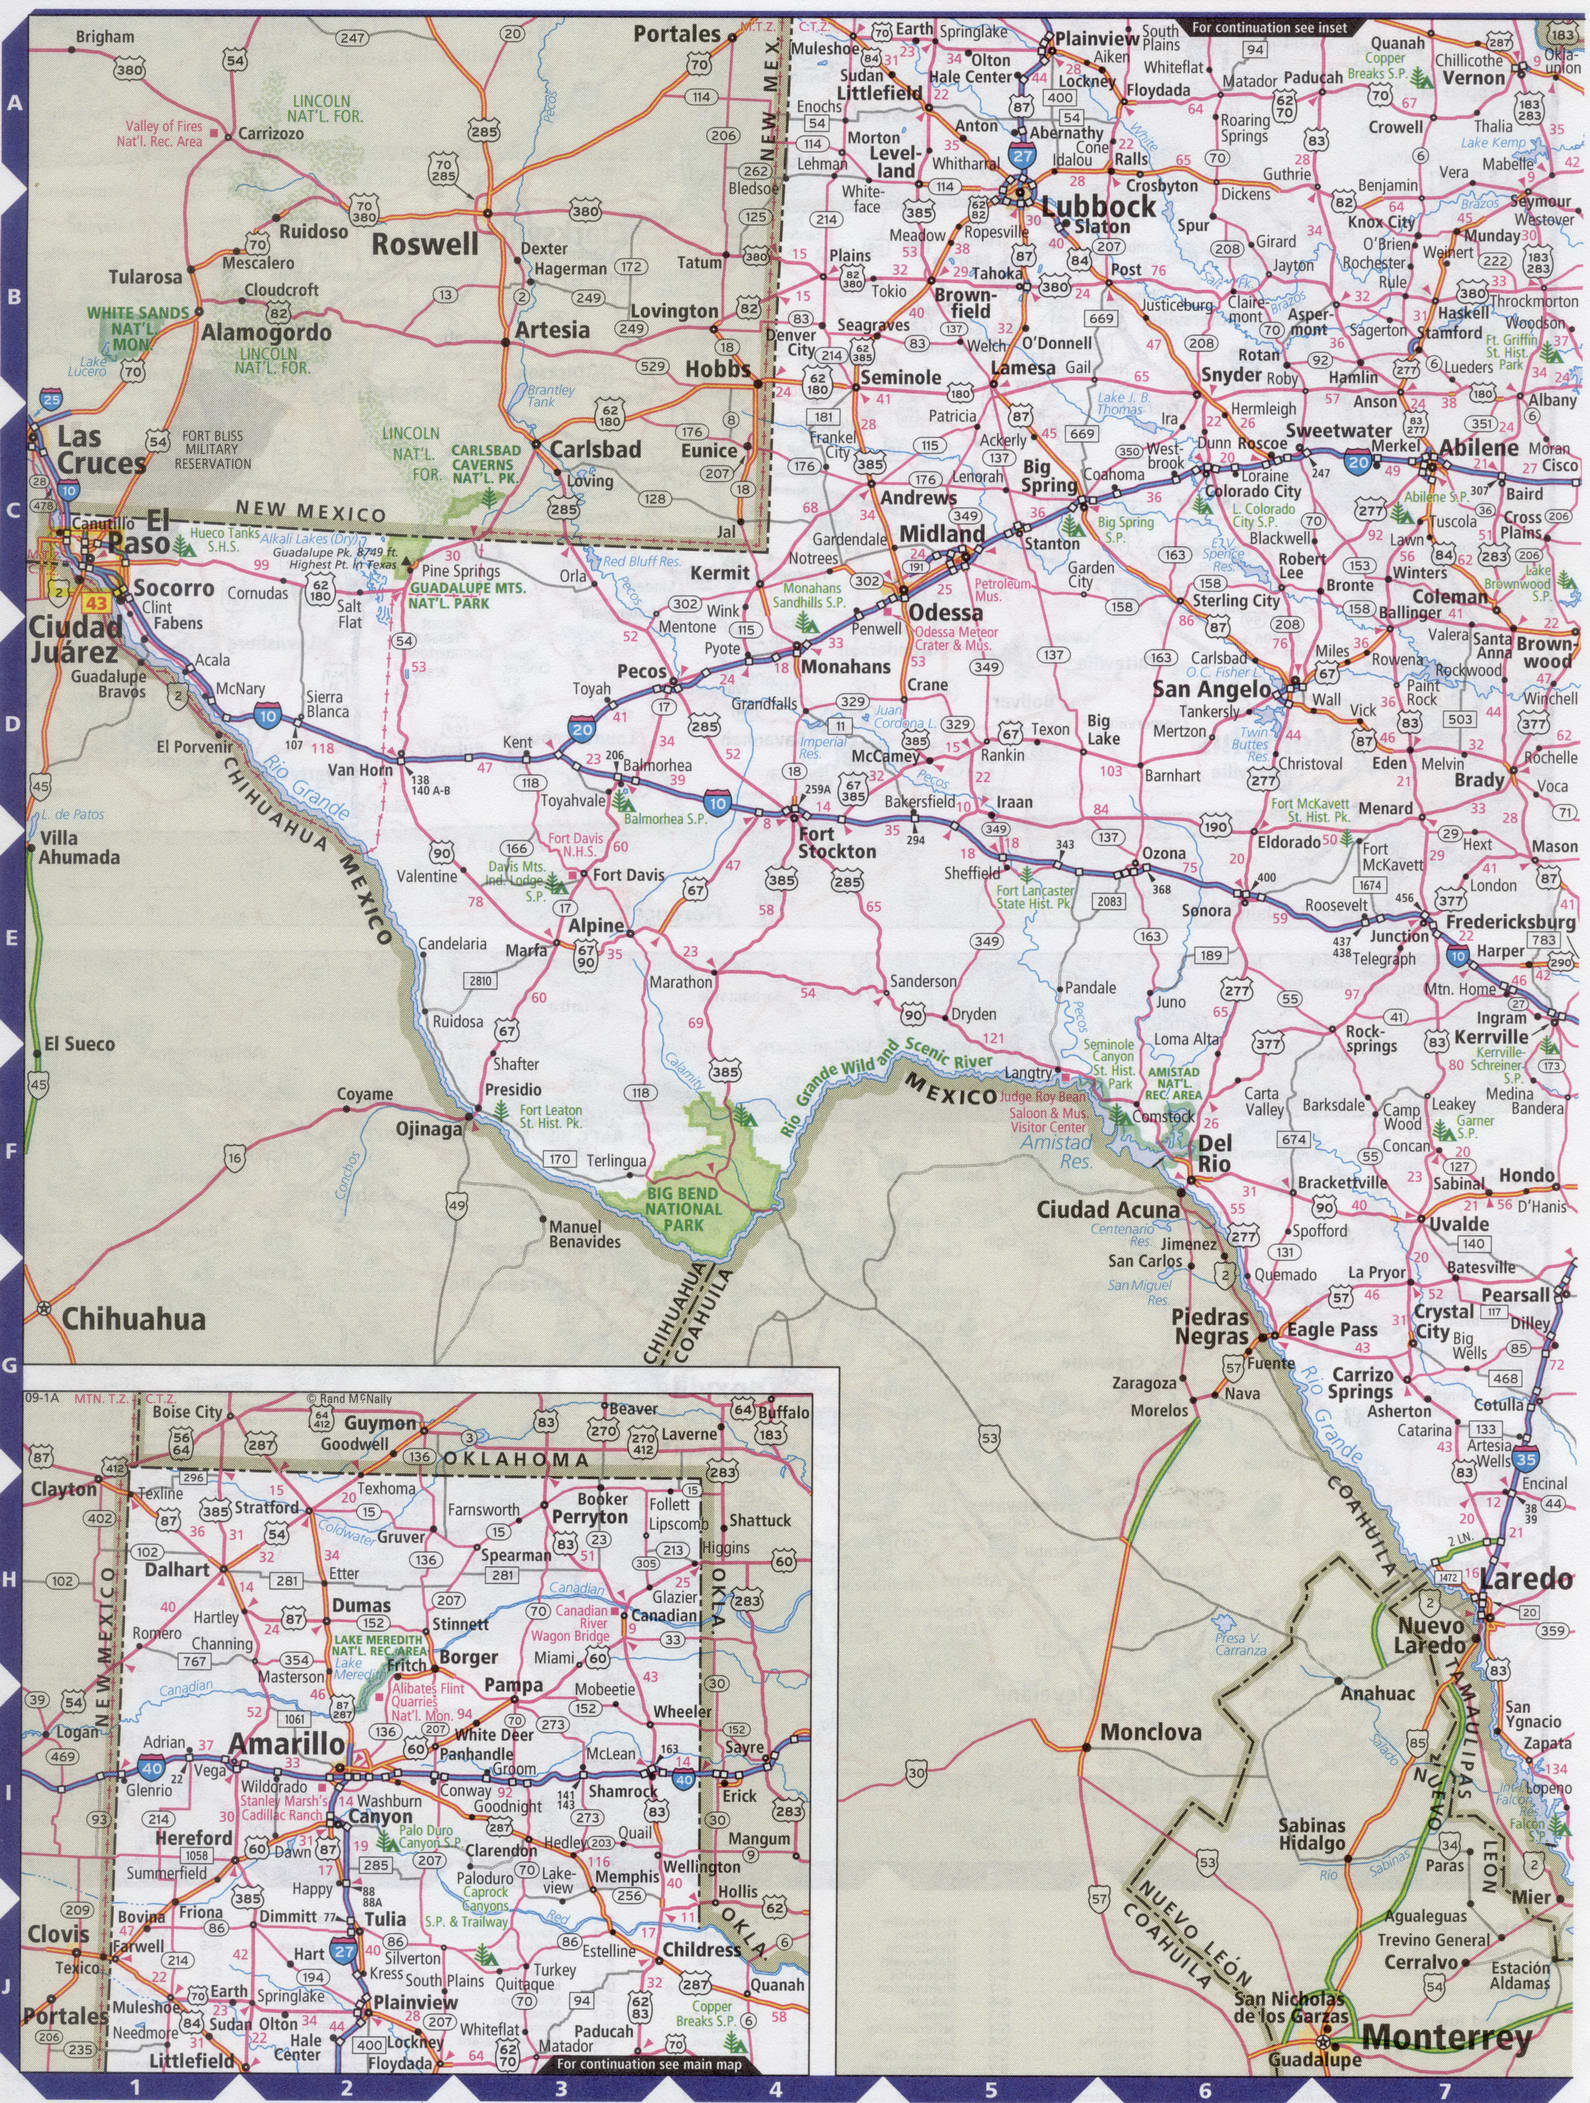 Roads map of Texas state - western Texas